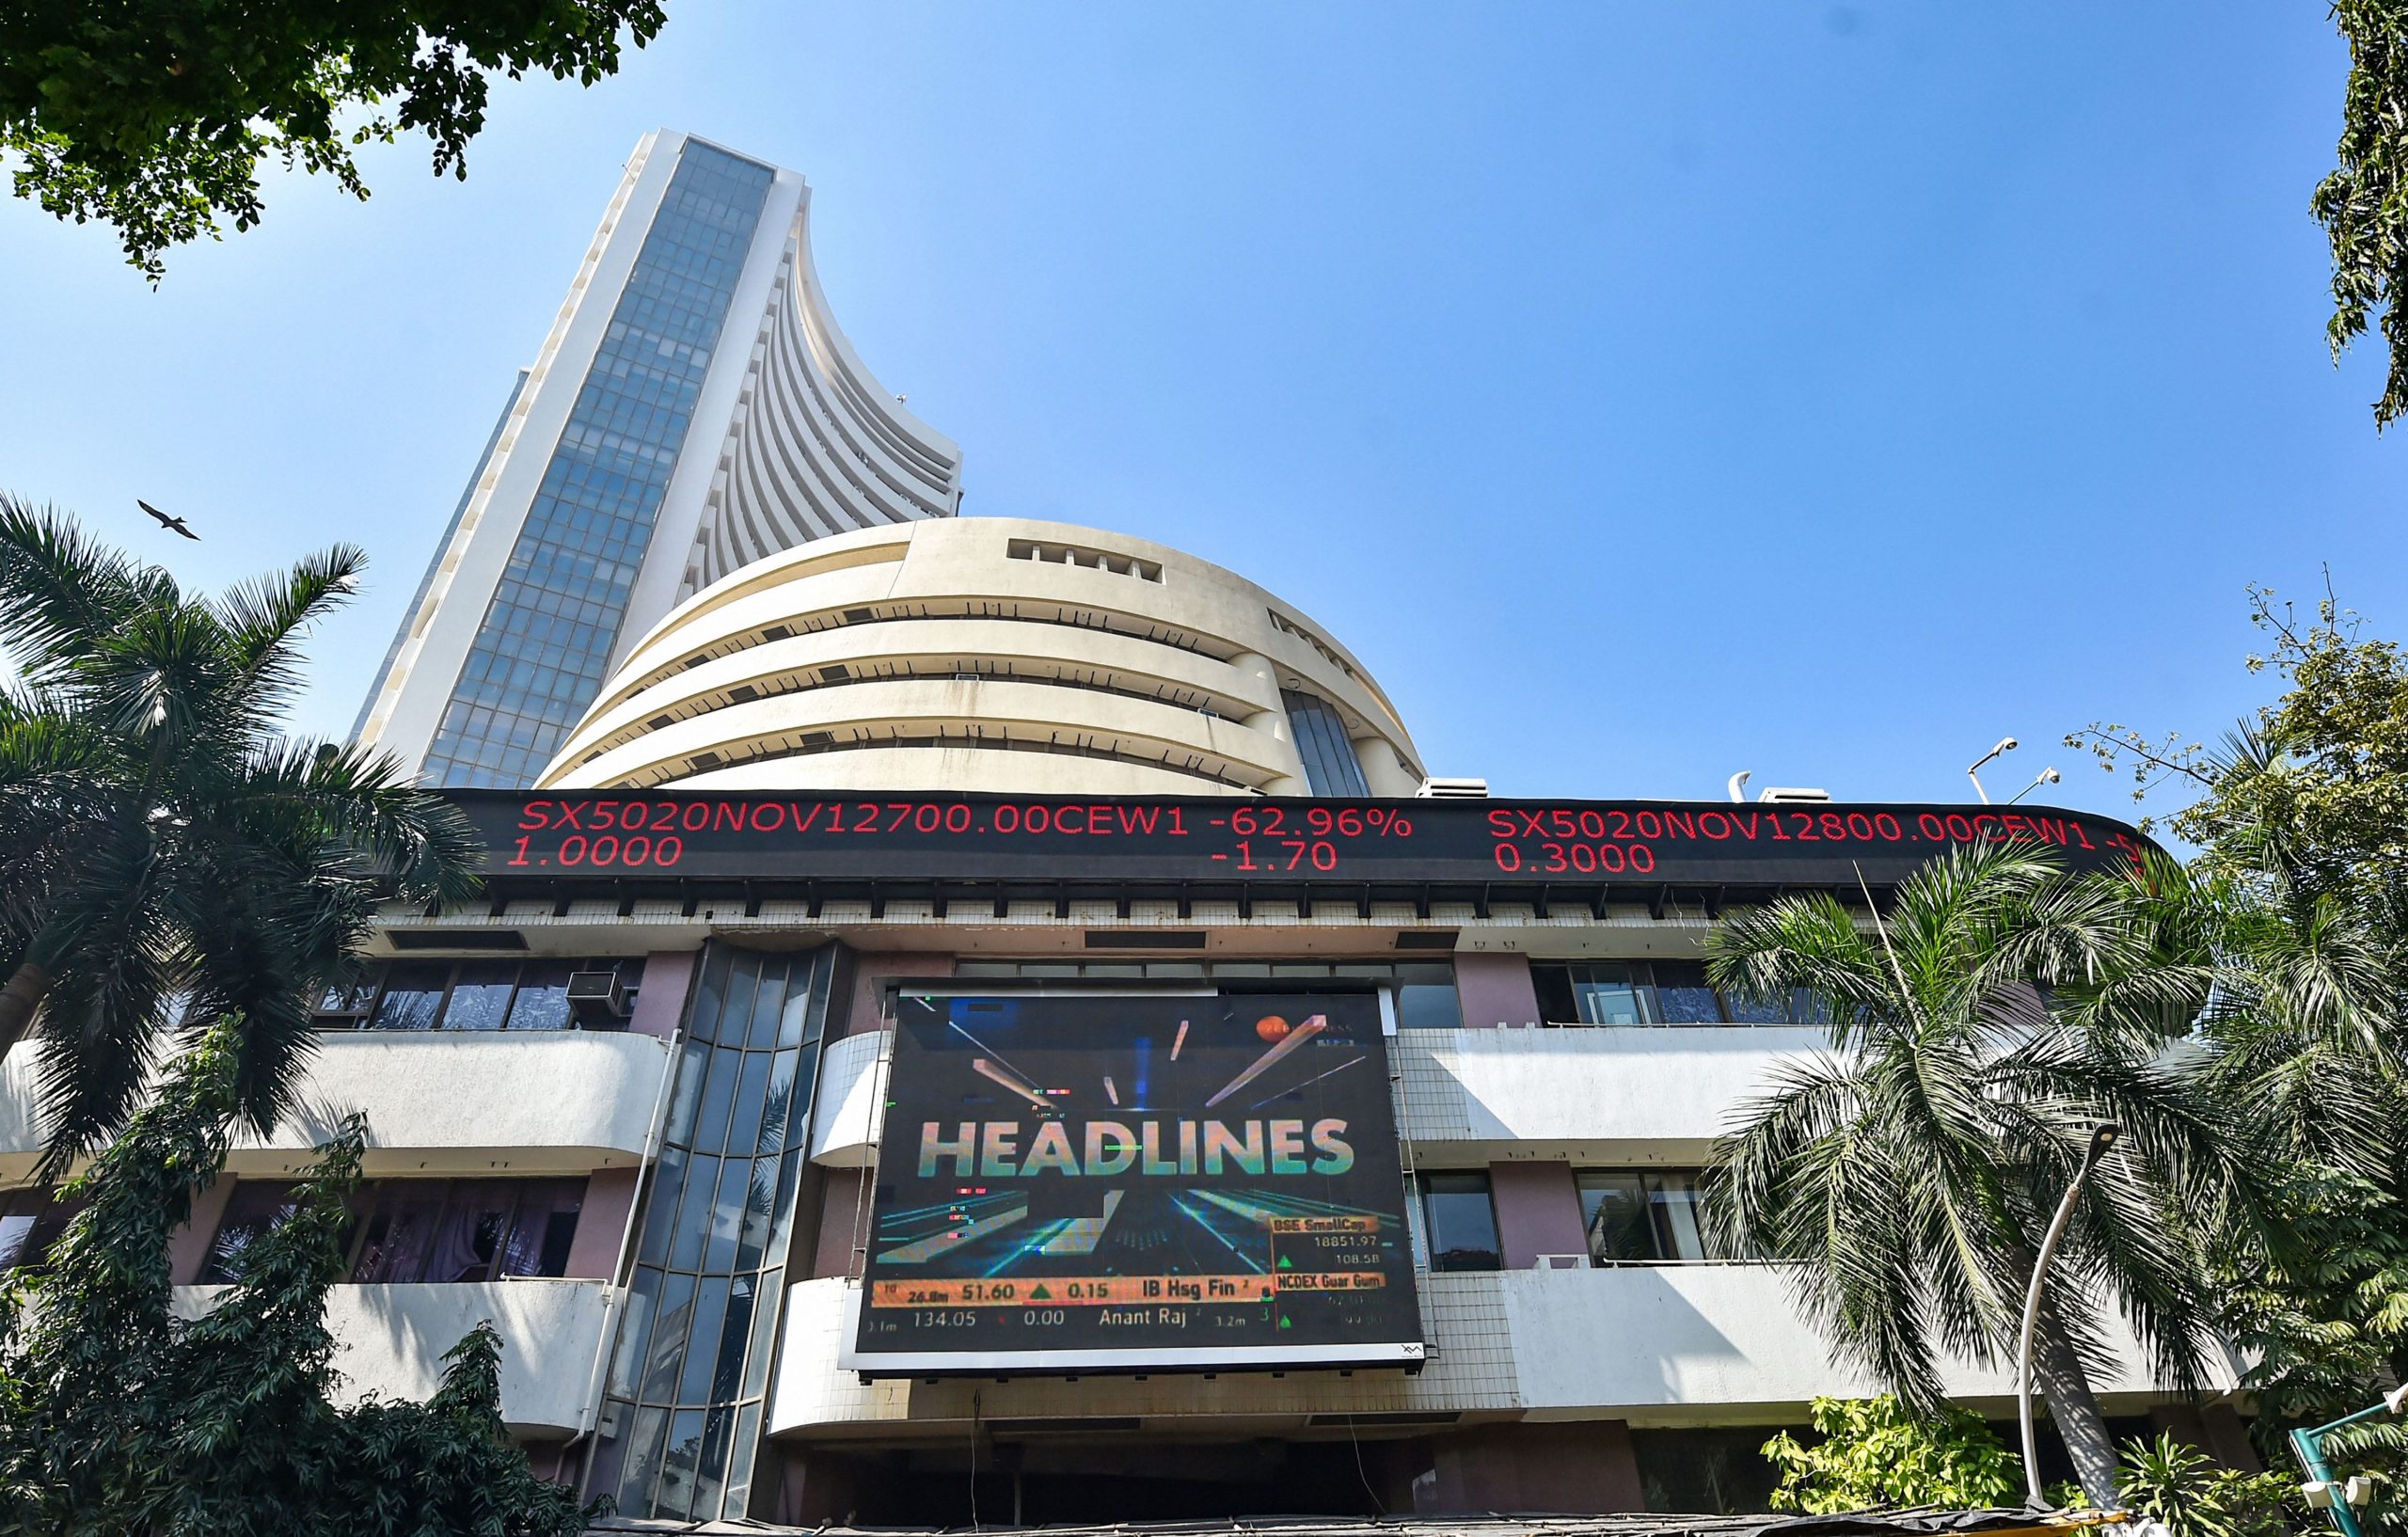 Trending Stocks: Airtel, Nazara, Titan, Ambuja and others in news today